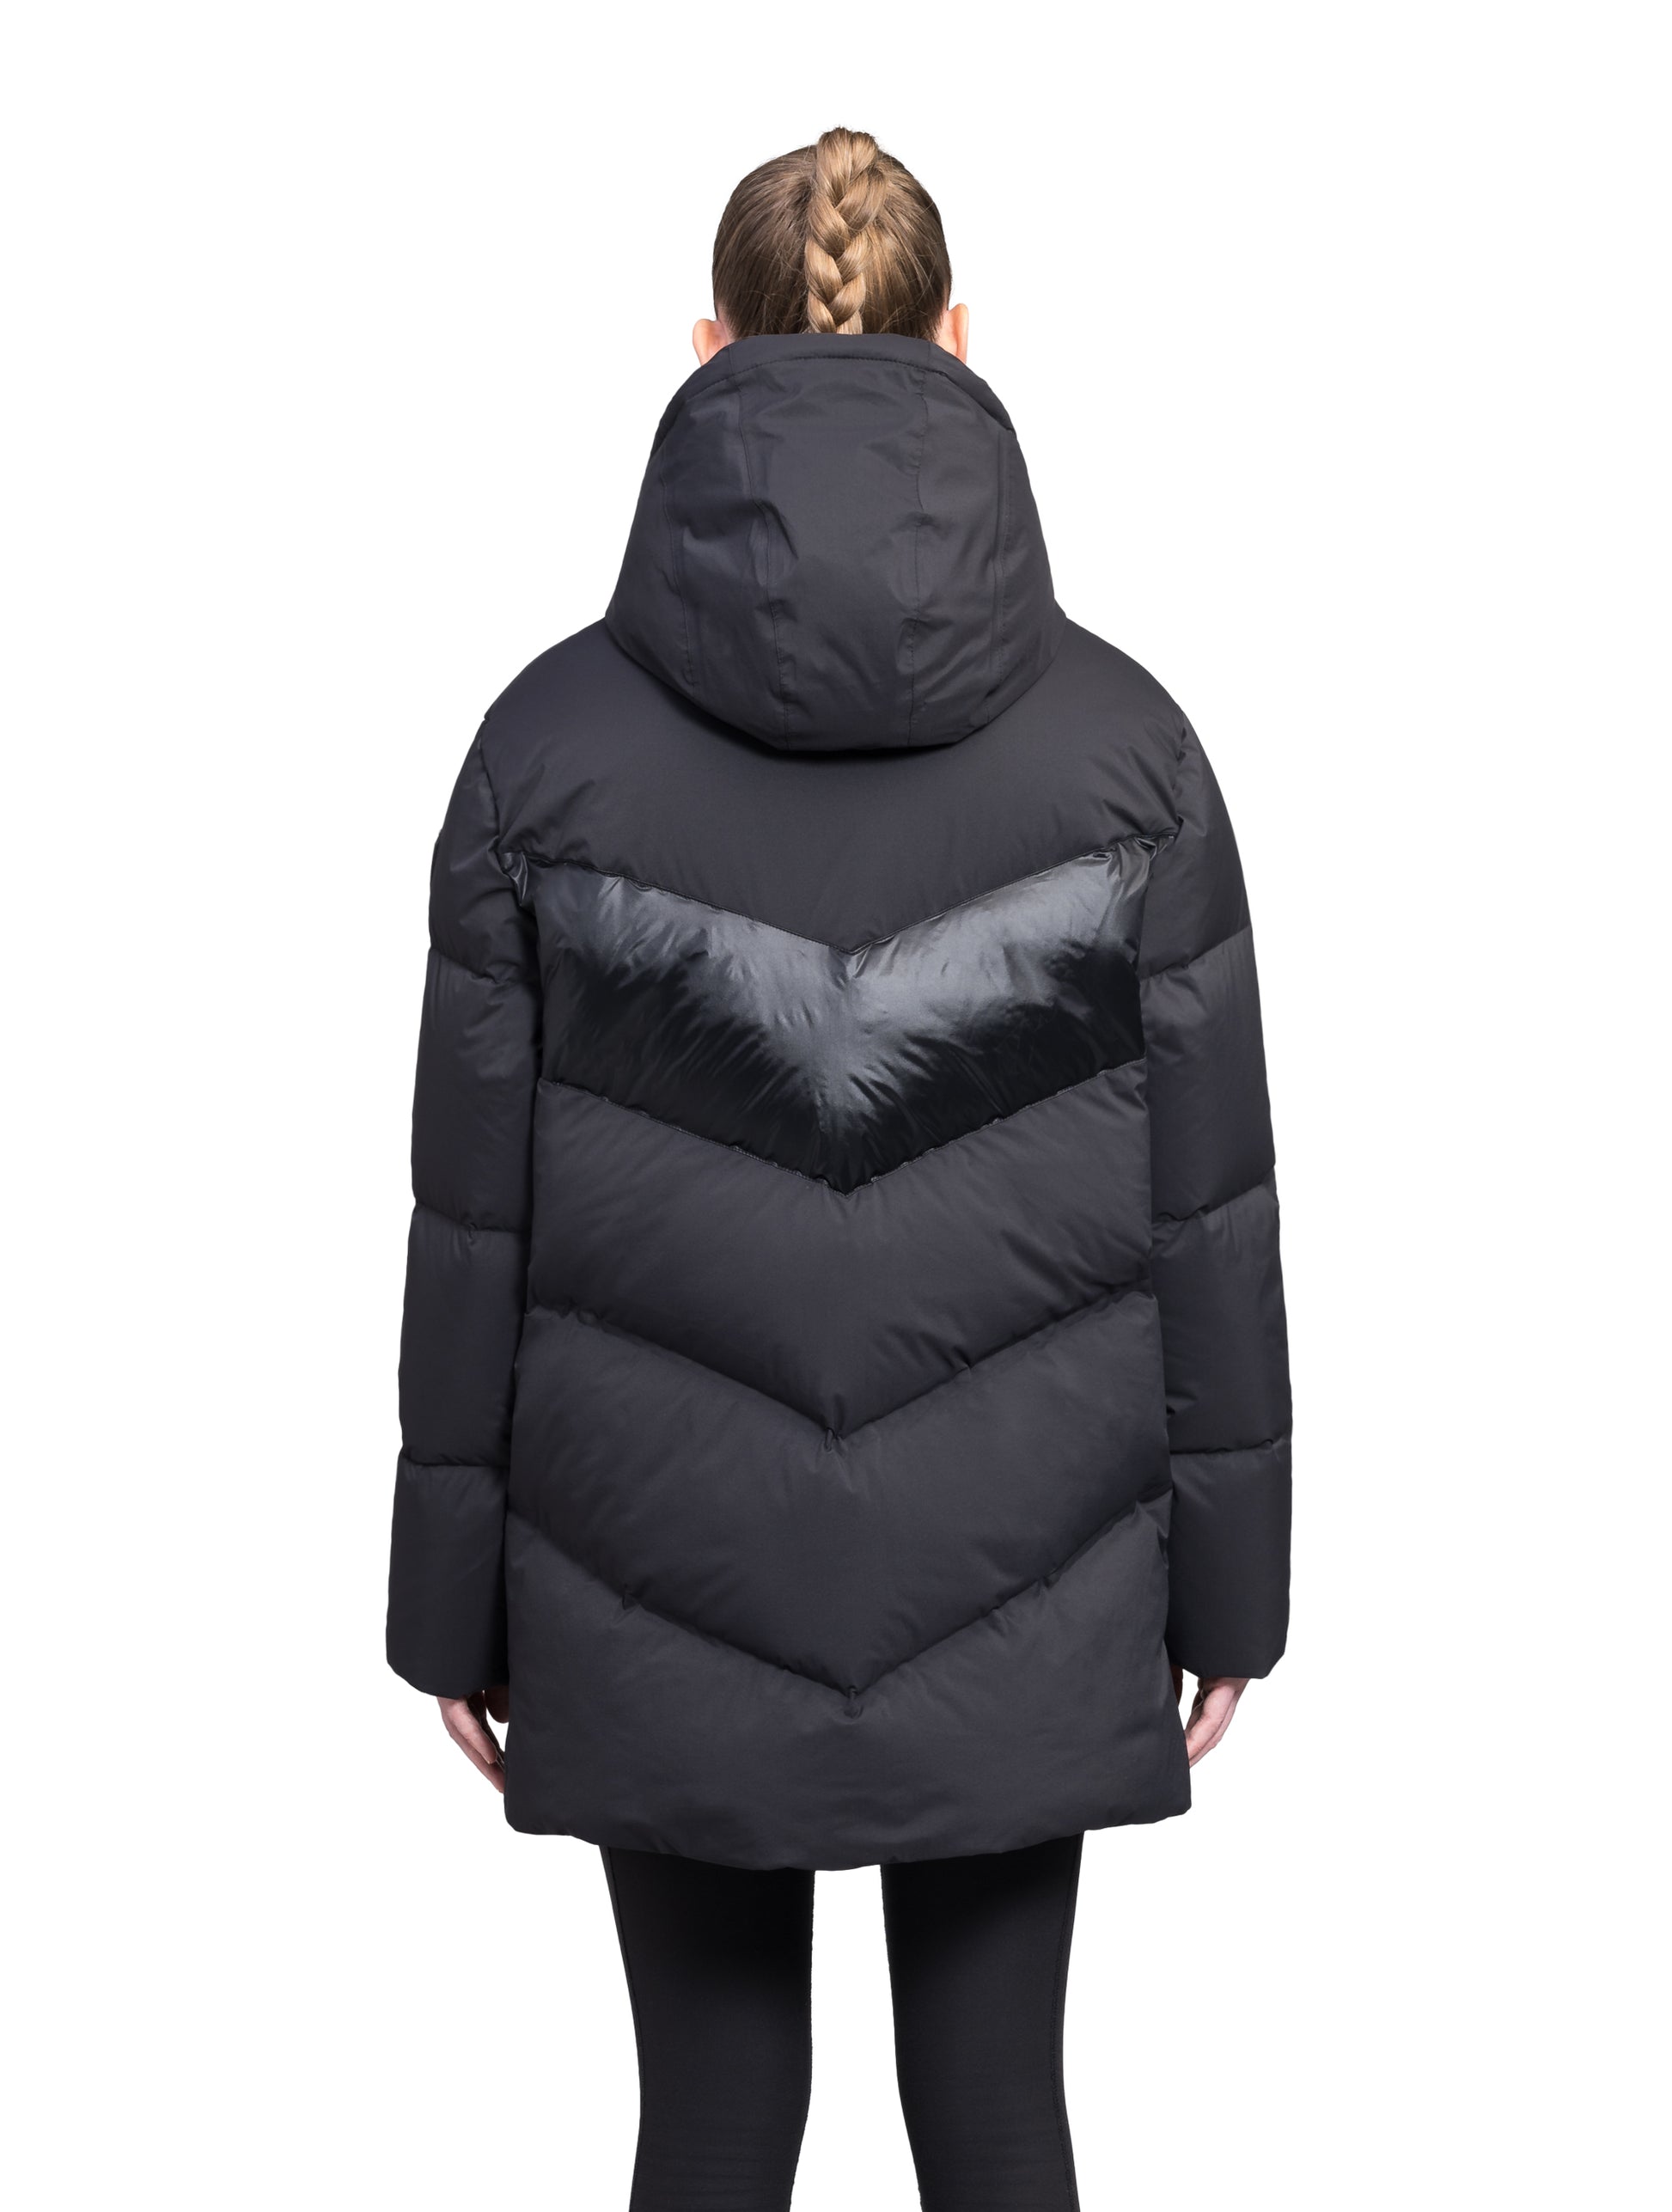 Isla Women's Chevron Quilted Puffer Jacket in thigh length, premium technical nylon taffeta fabrication, Premium Canadian origin White Duck Down insulation, non-removable down-filled hood, two-way centre-front zipper, zipper pockets at waist, contrast cire technical nylon taffeta detailing on chest and back, in Black